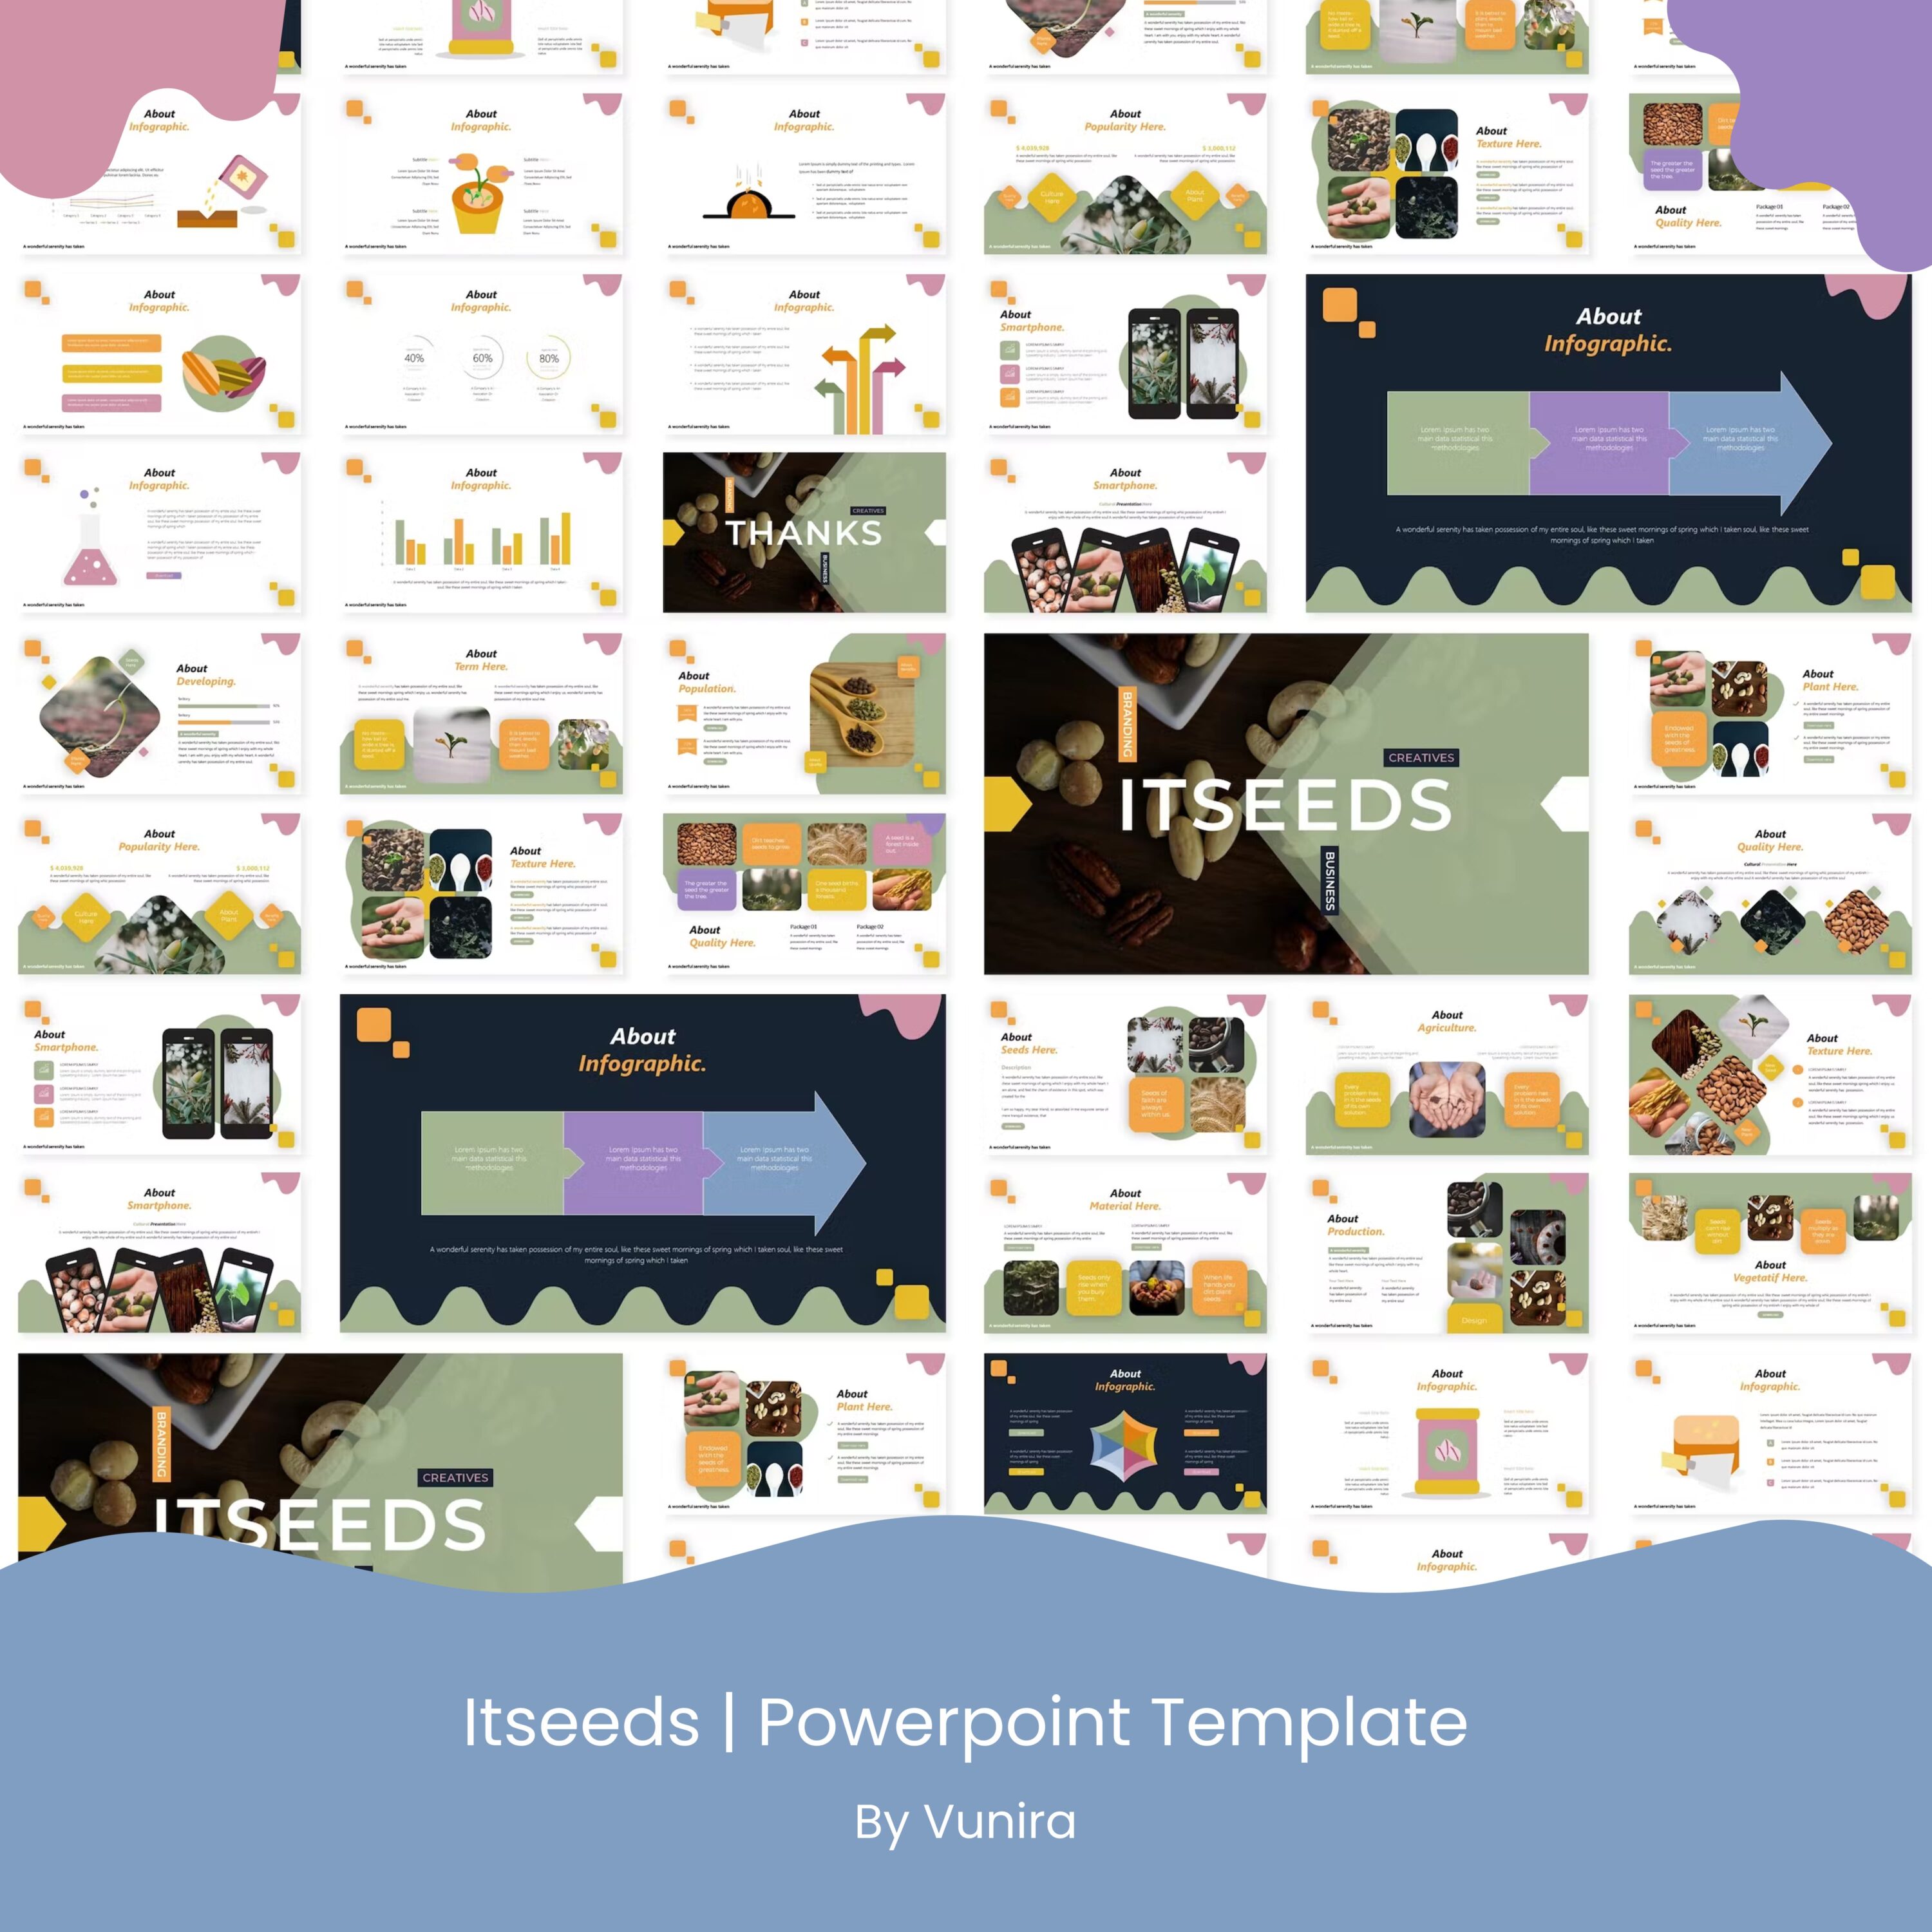 Itseeds | Powerpoint Template - main image preview.